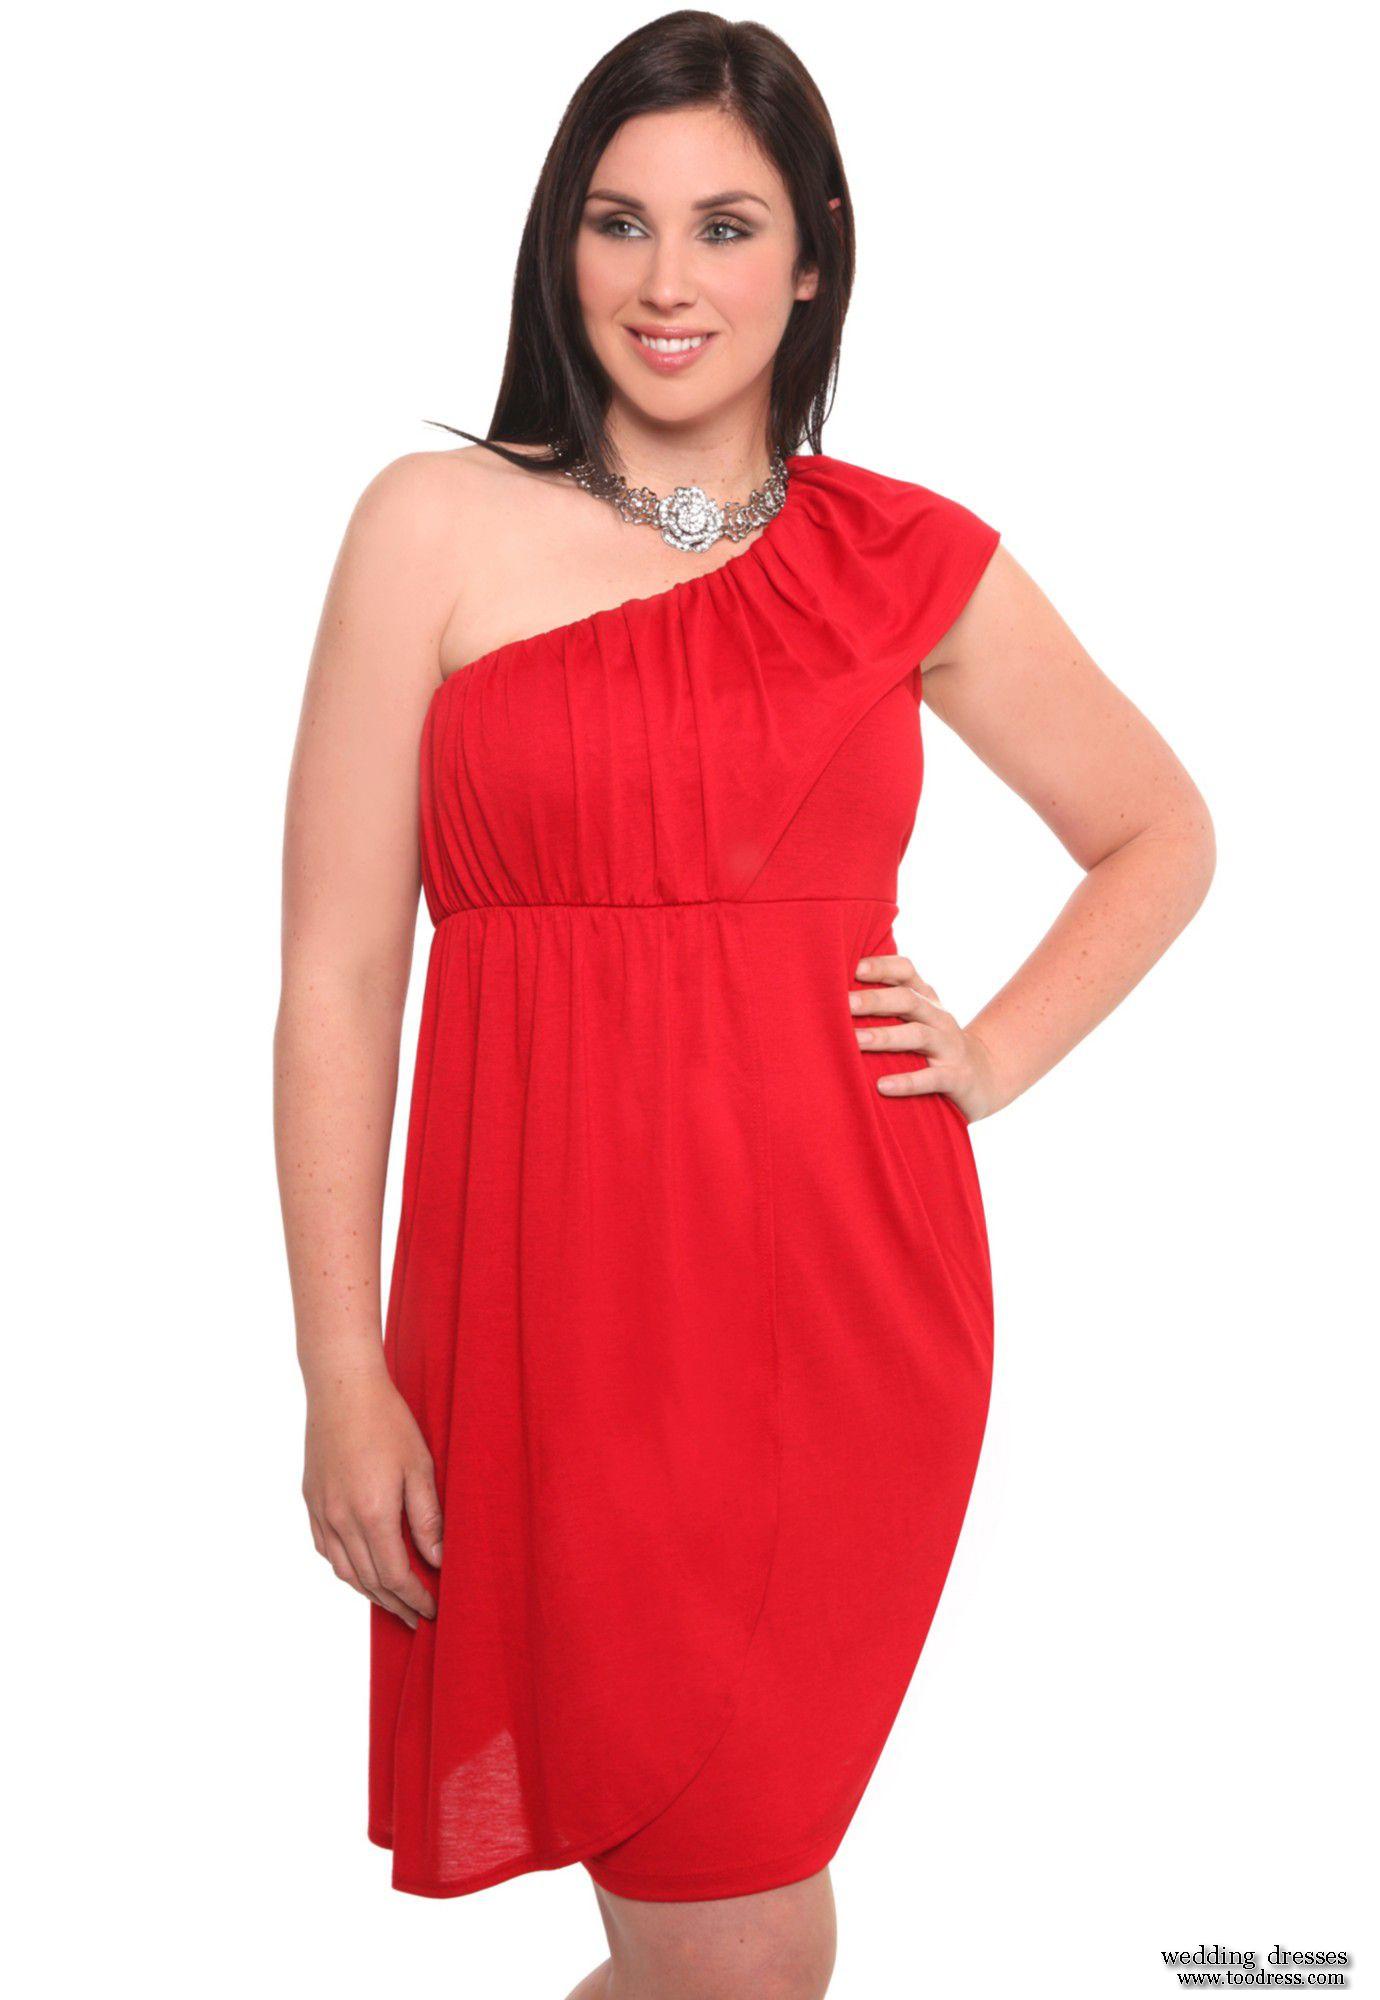 Plus Size Red And White Dress - How To Get Attention